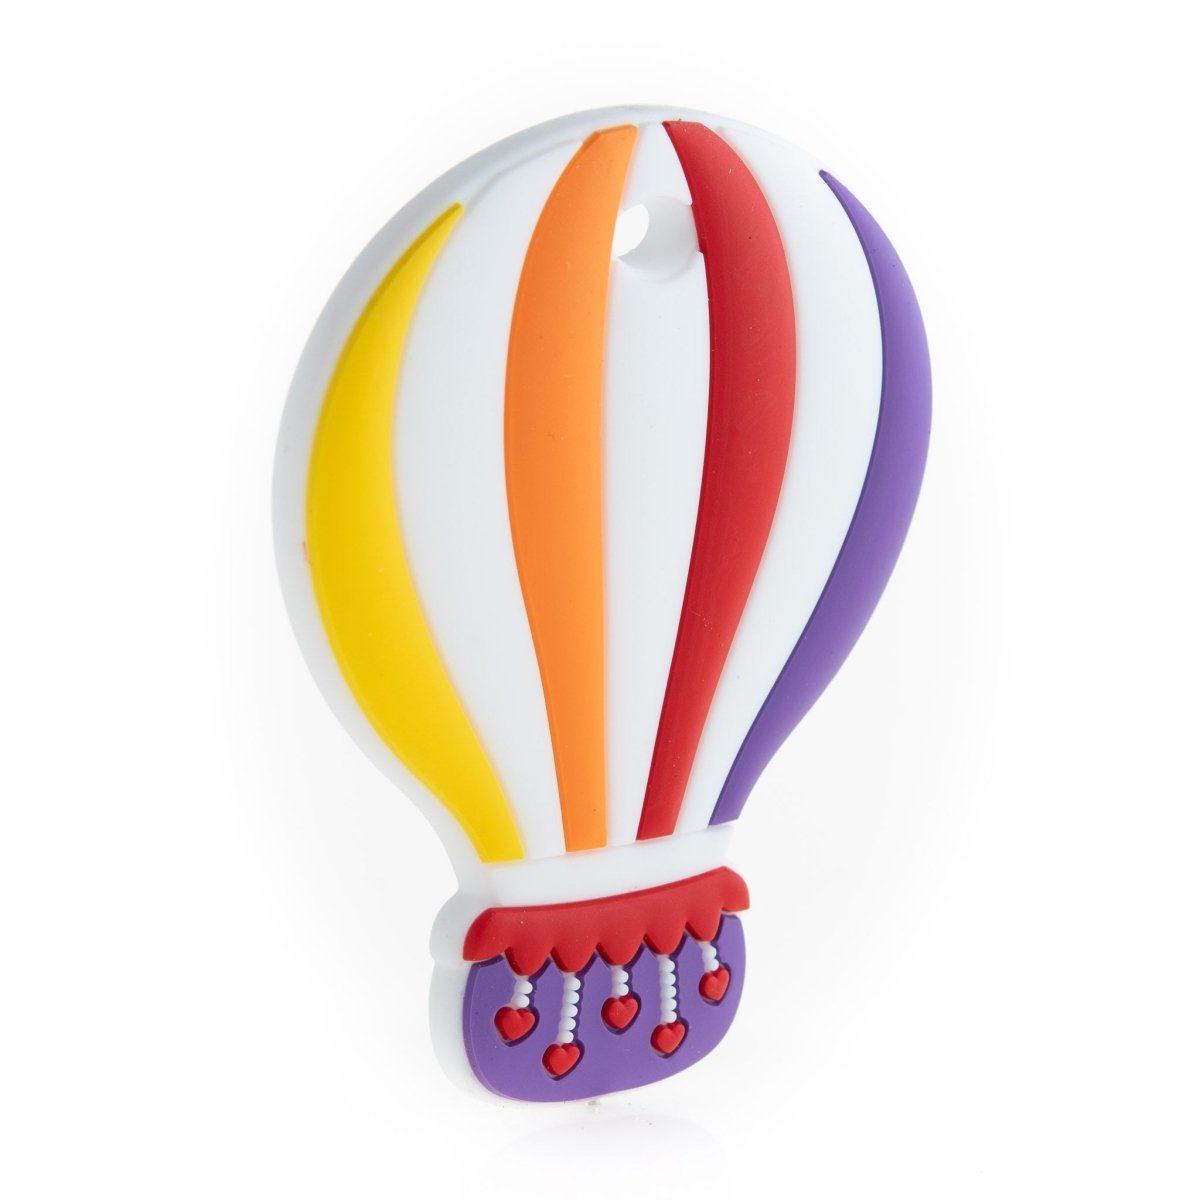 Silicone Teethers and Pendants Colorful Hot Air Balloons Twilight from Cara & Co Craft Supply